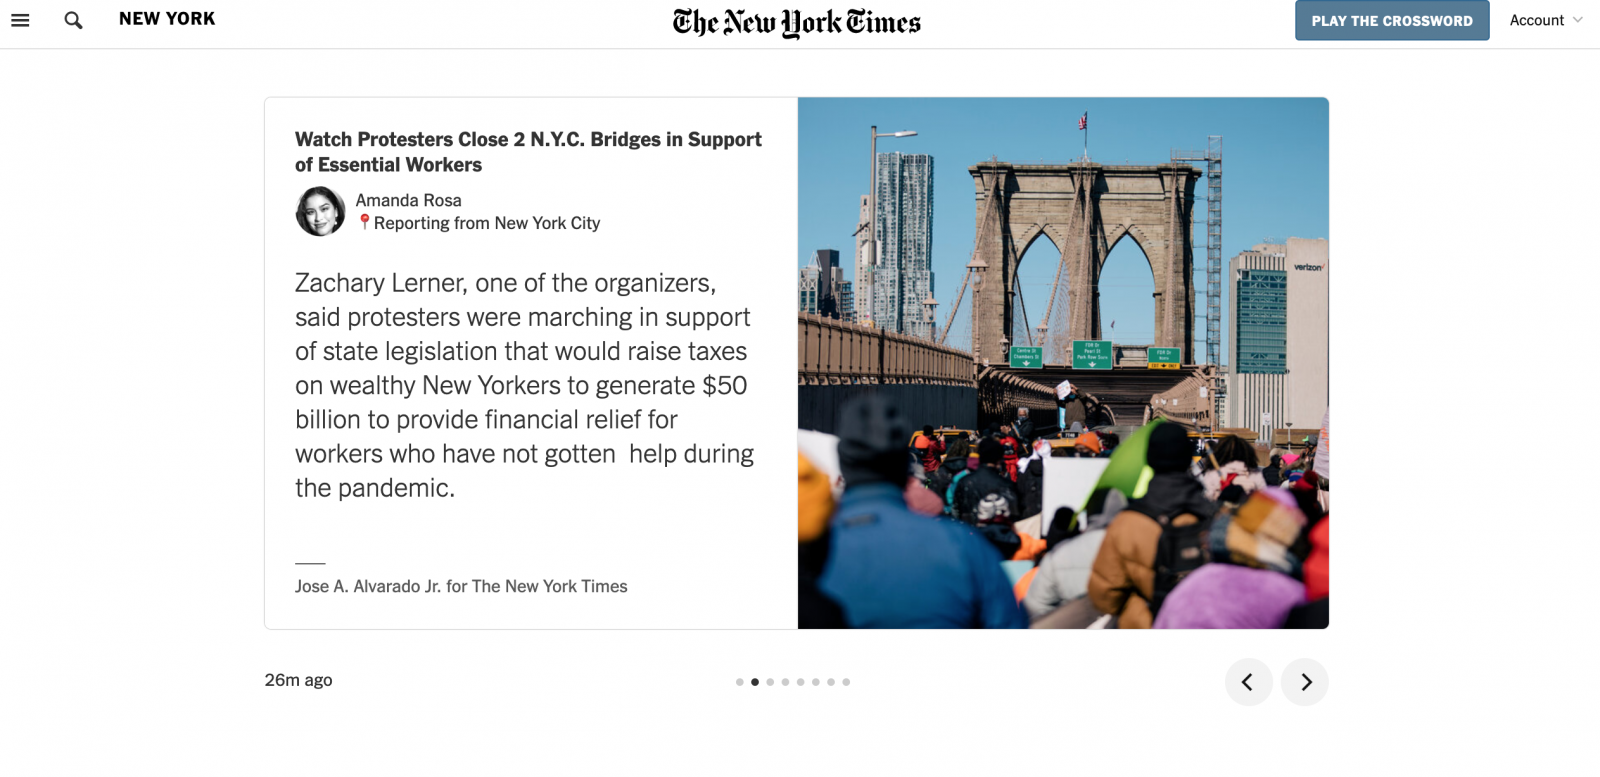 for The New York Times: Watch Protesters Close 2 N.Y.C. Bridges in Support of Essential Workers